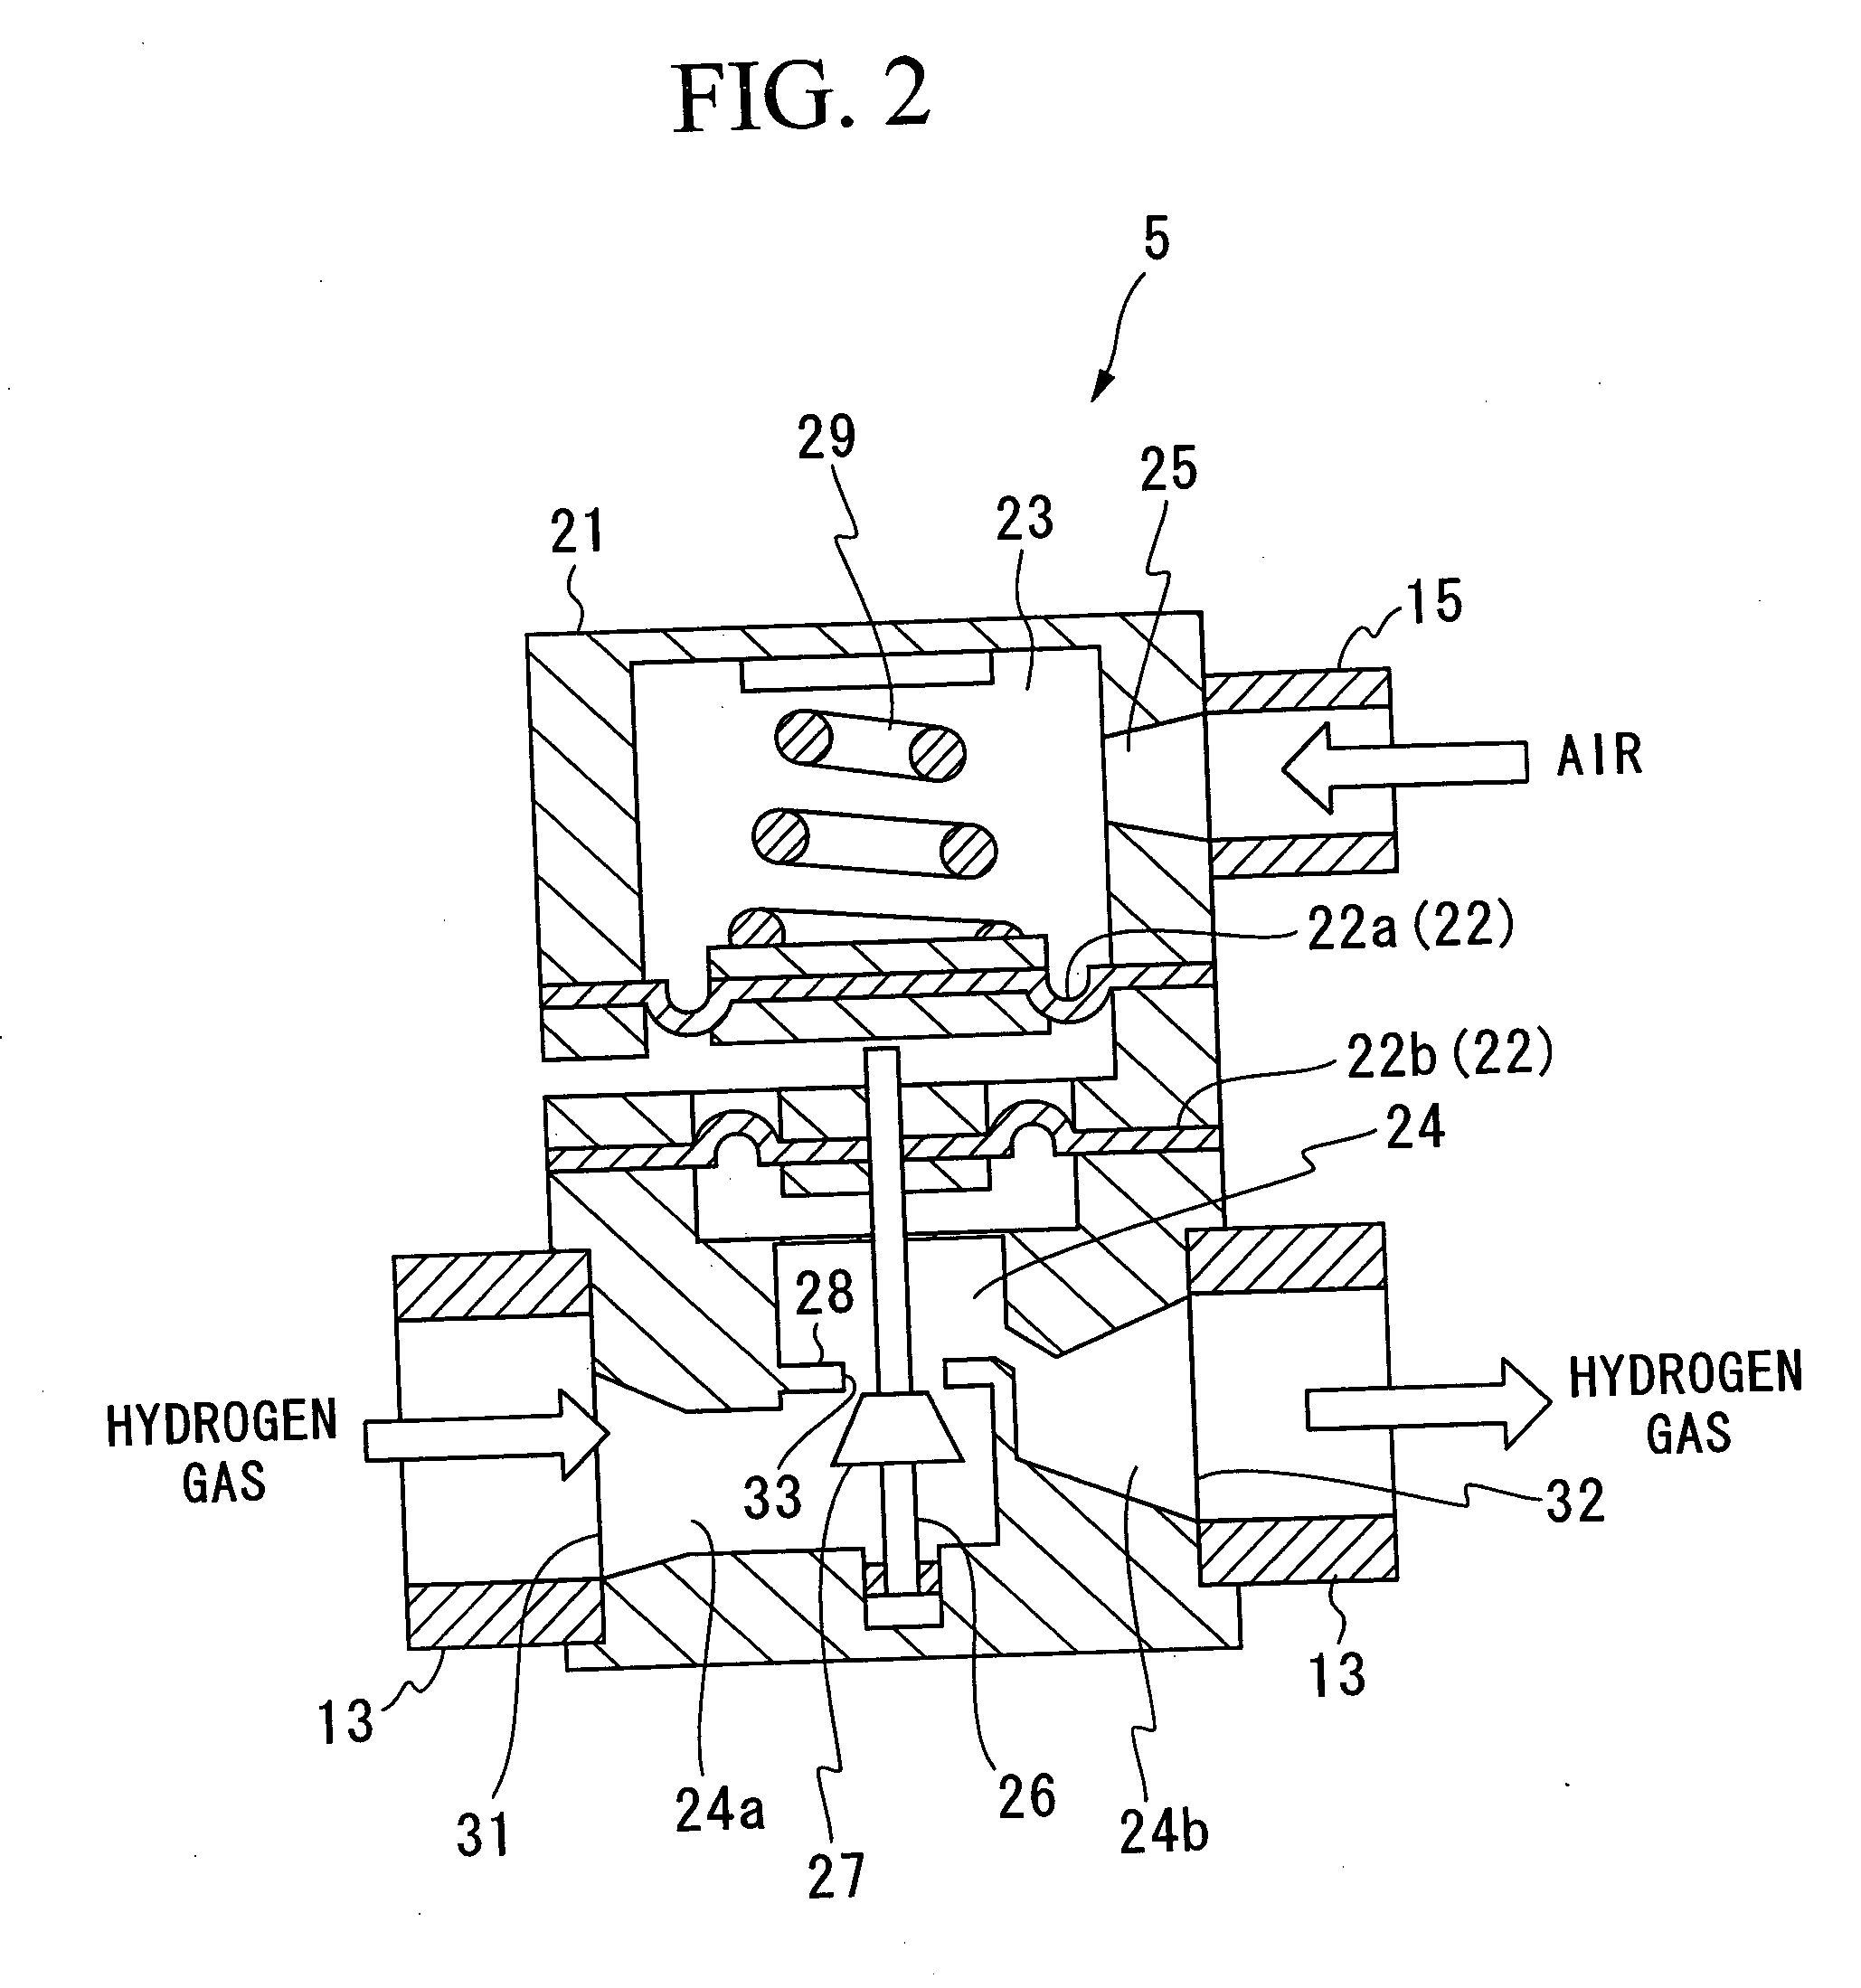 Reaction gas supply apparatus and method for fuel cell